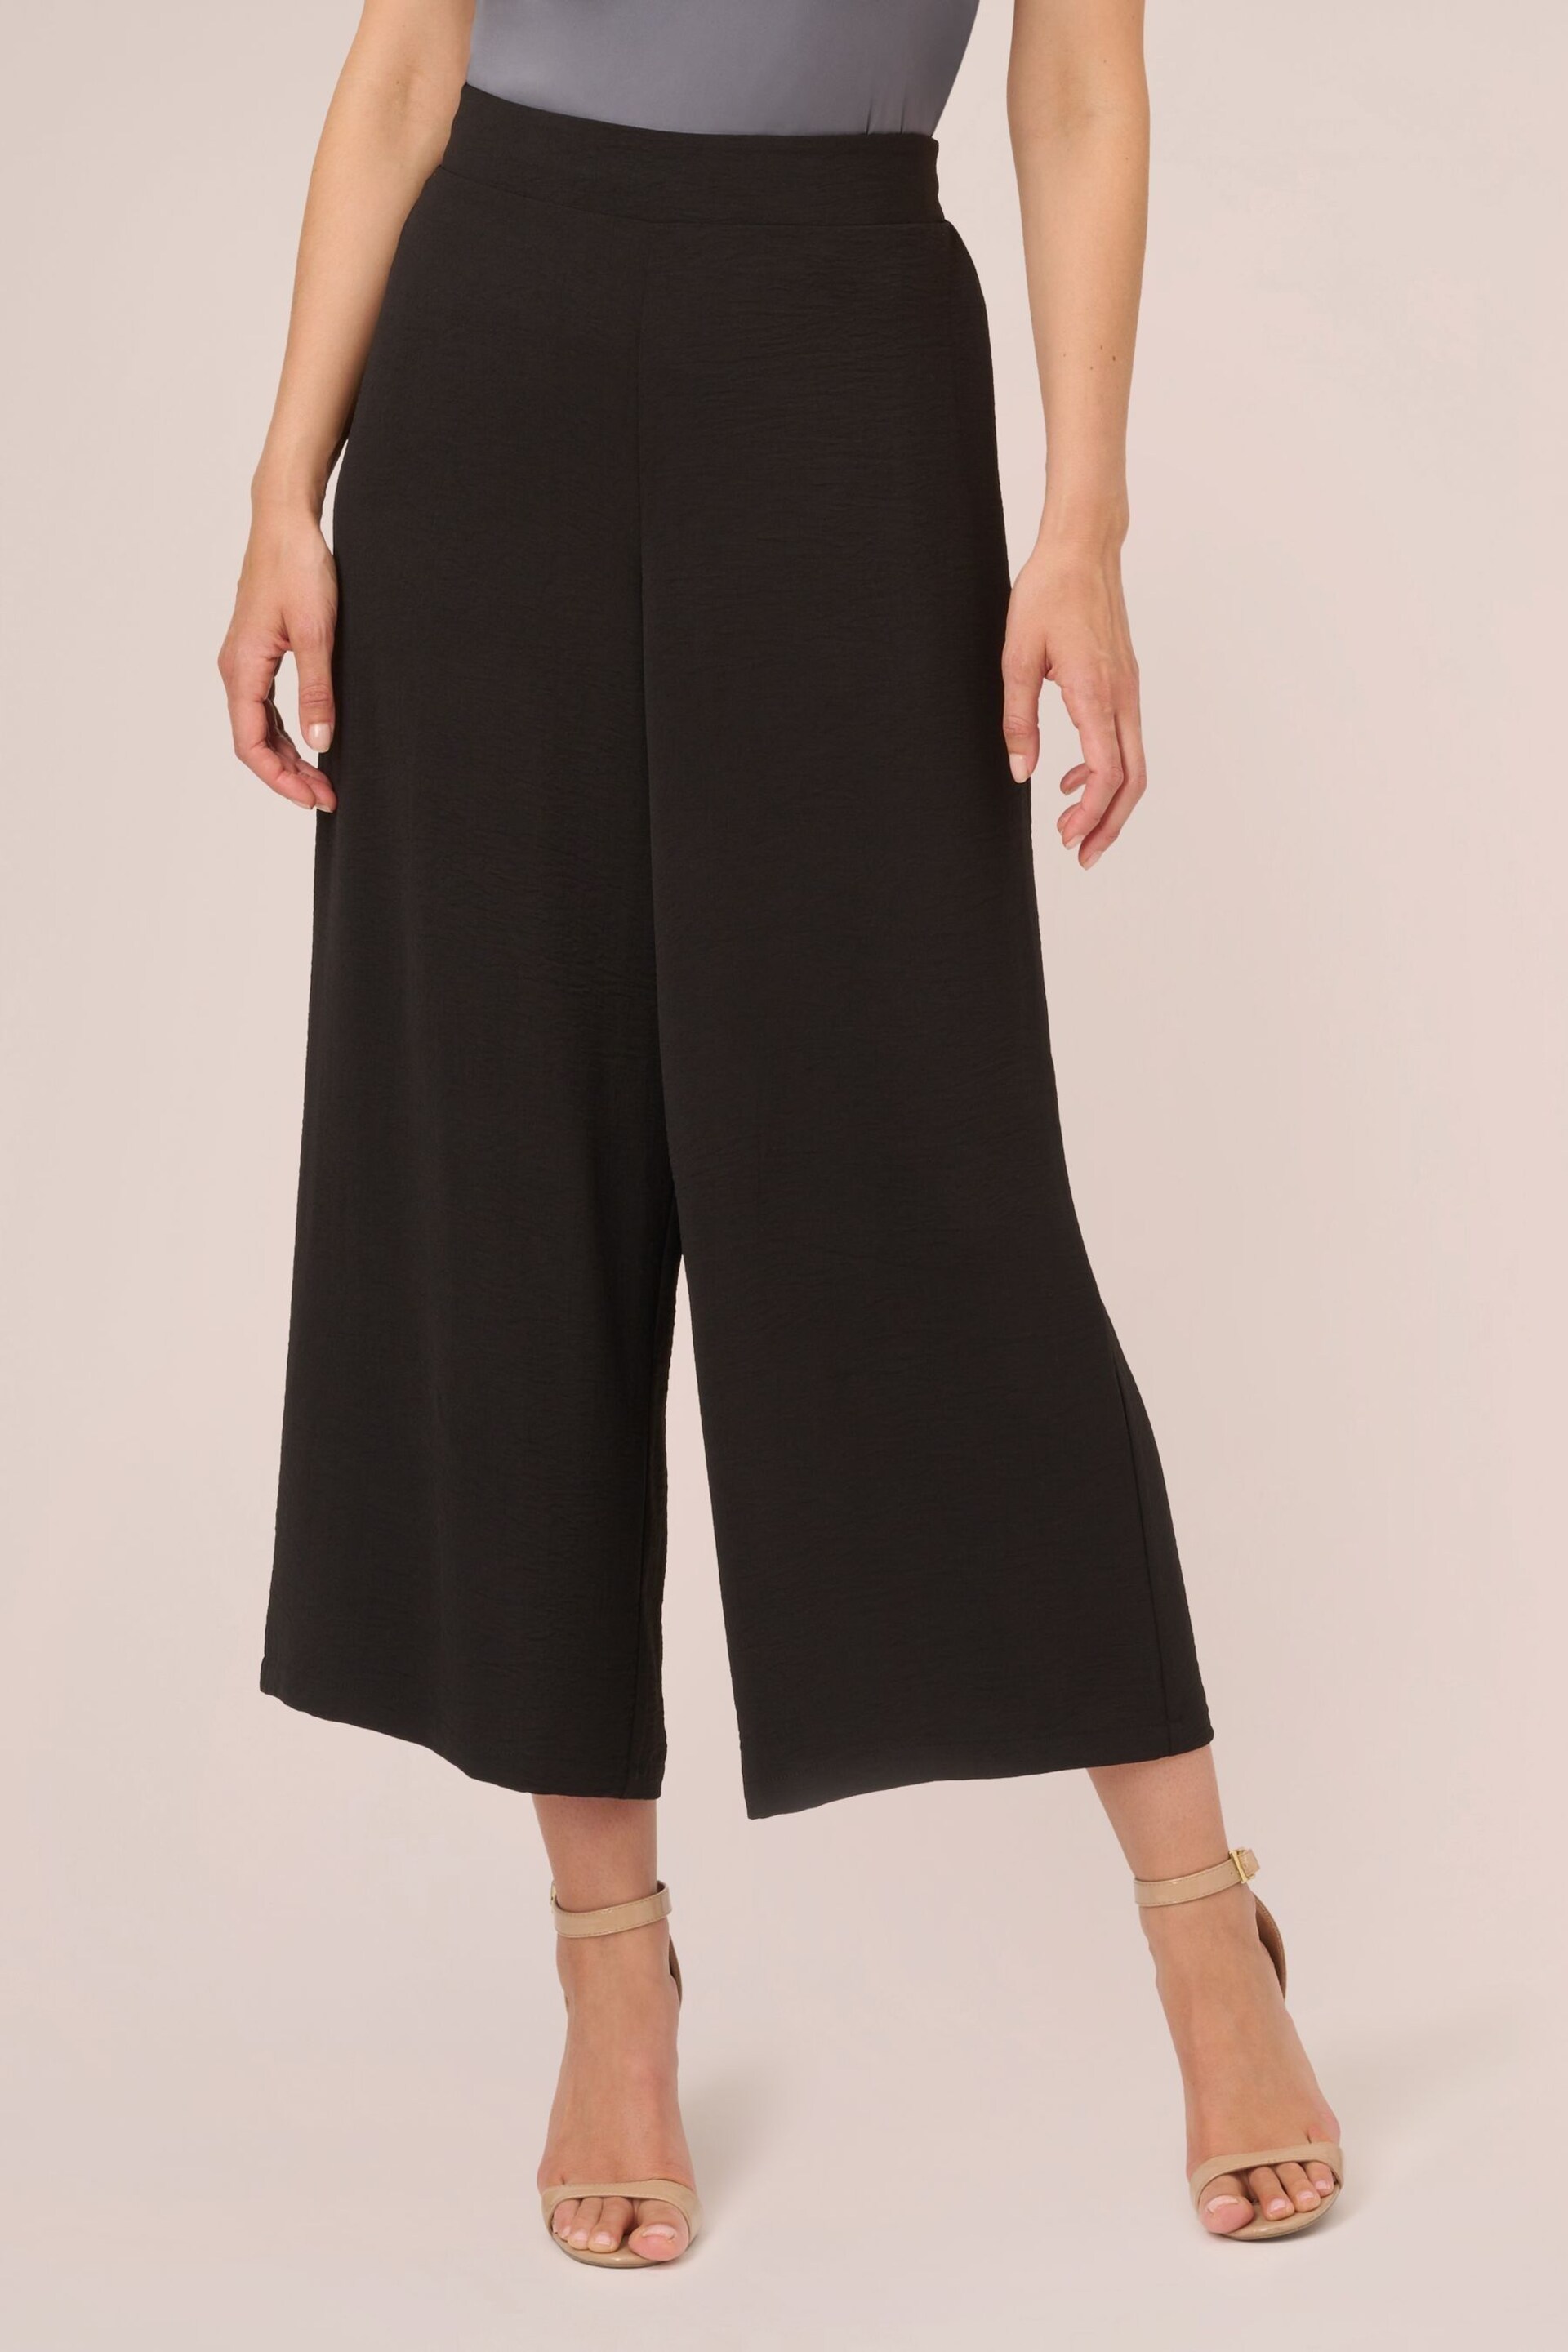 Adrianna Papell Textured Satin Pull On Black Trousers - Image 1 of 6